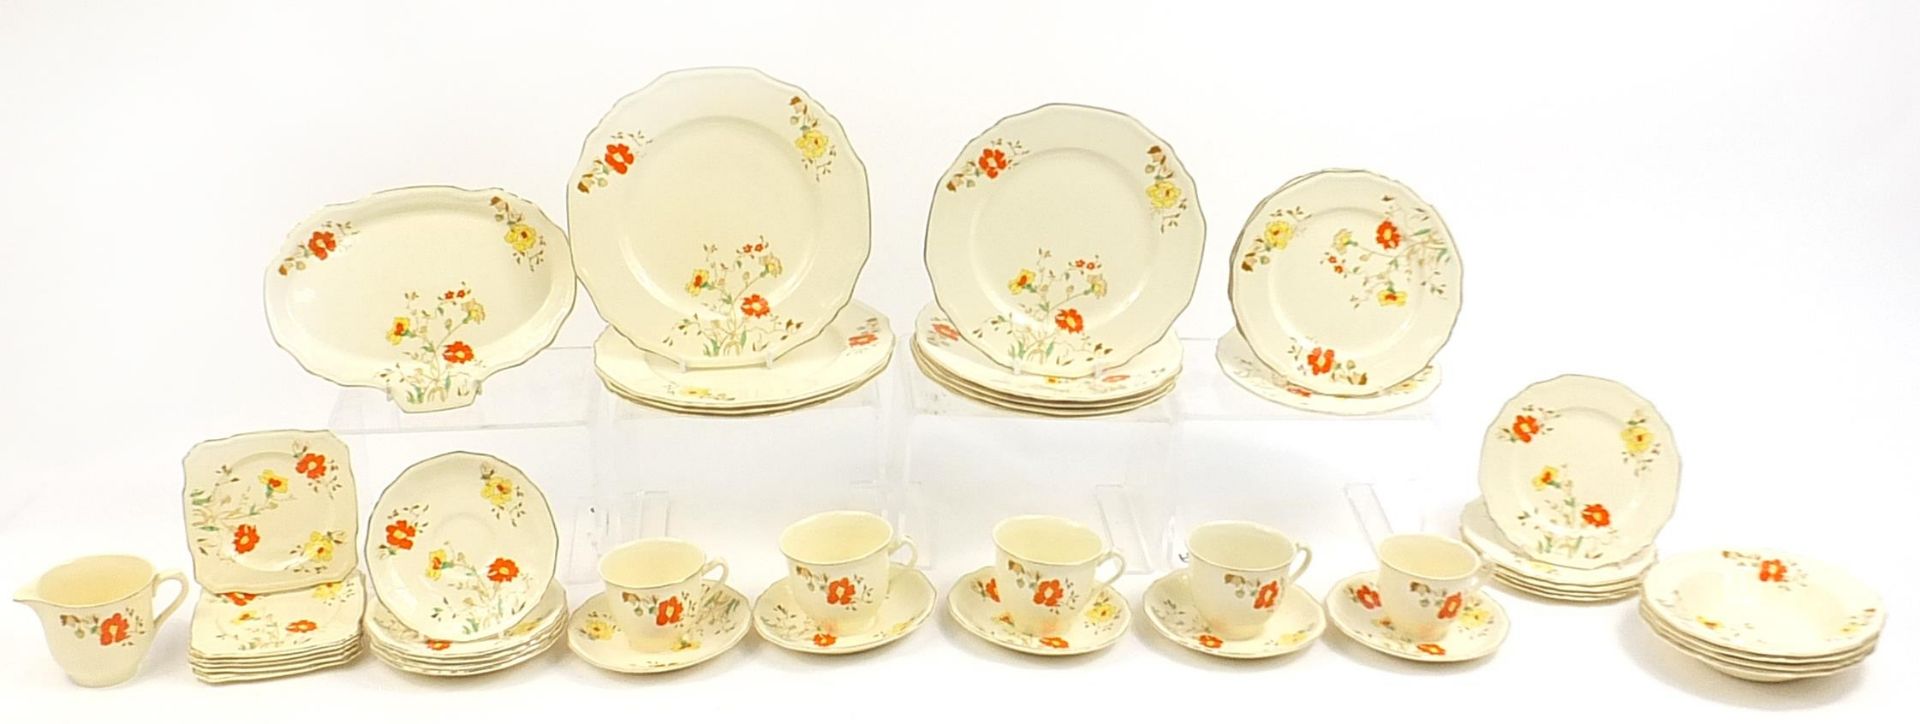 1930's Alfred Meakin Marigold pattern dinner and teaware